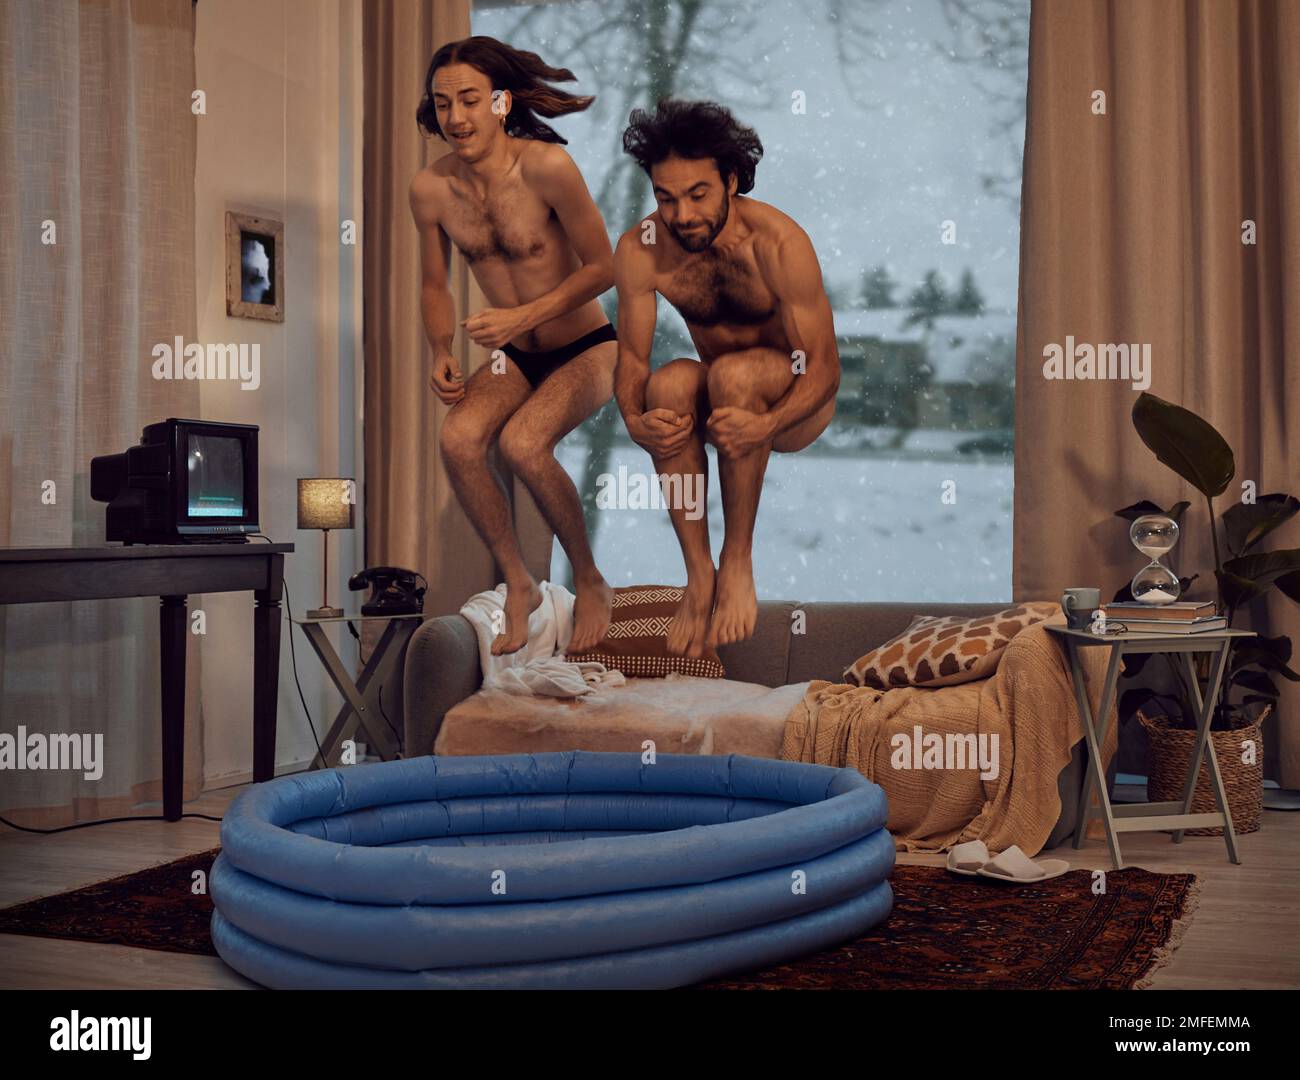 Hipster, rebel and jump into inflatable pool in a lounge inside a retro home or house having fun and playing. Funny, snow and men dive together in the Stock Photo